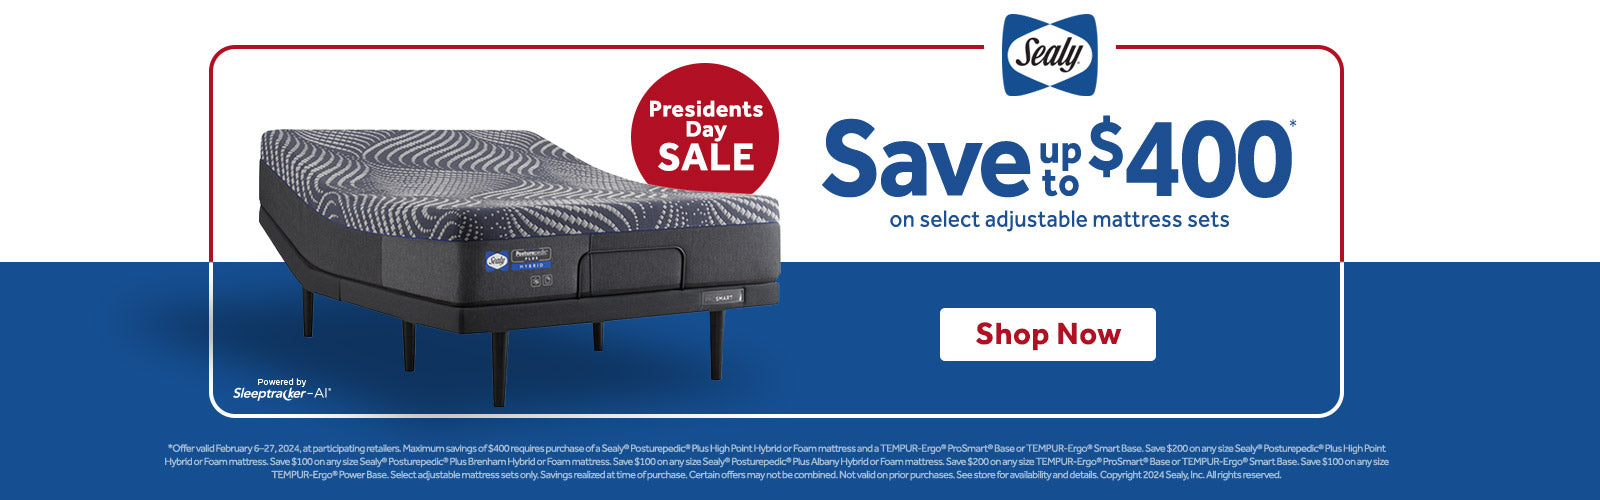 Sealy Presidents Day Sale - Save up to $400 on Select Adjustable Mattress Sets